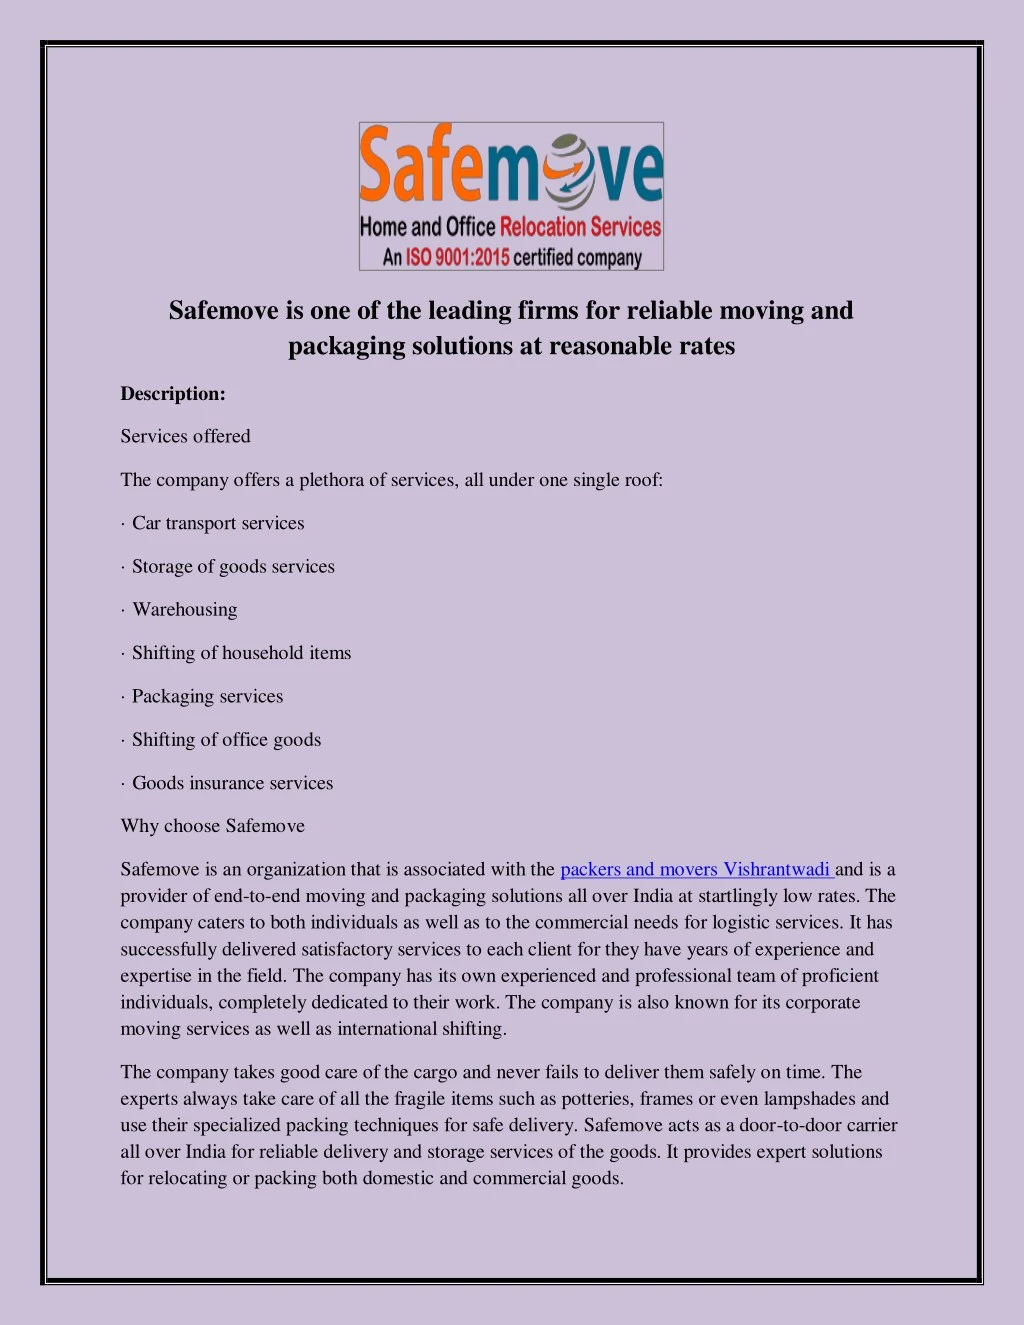 safemove is one of the leading firms for reliable